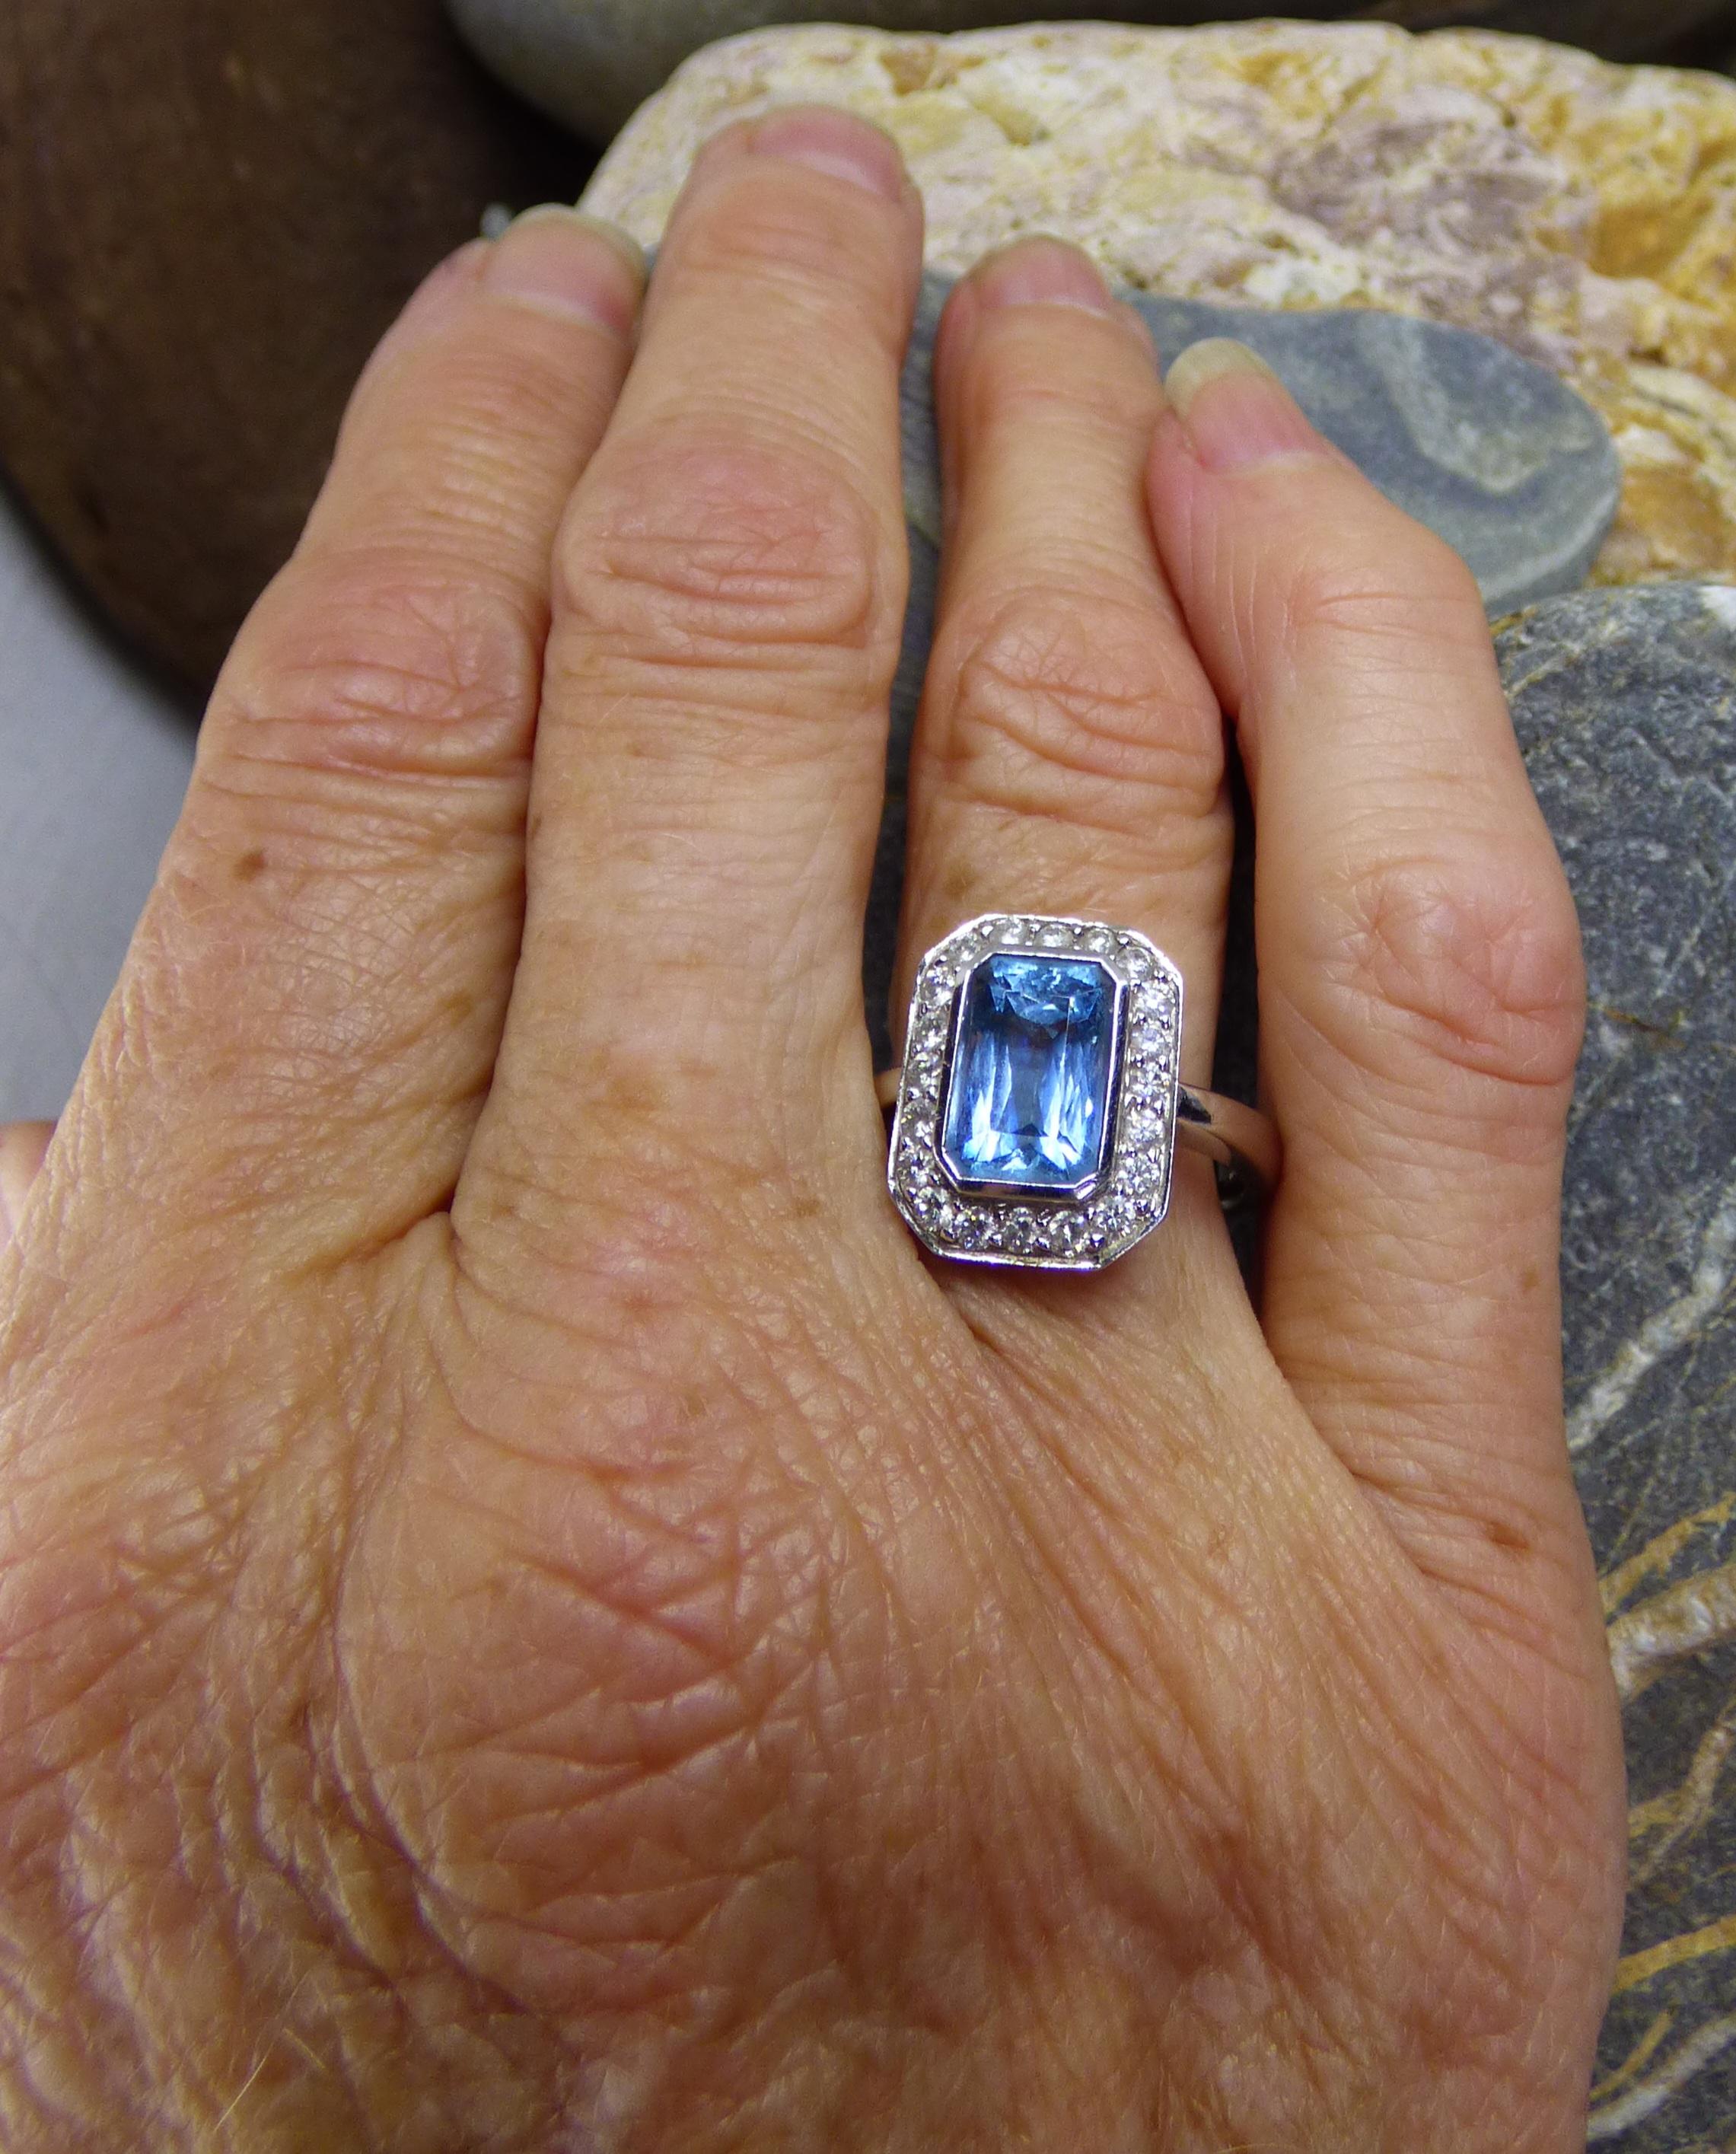 An Aquamarine and Diamond ring. The total size of the cluster is 15X12mm. The Aquamarine is 3.05ct surrounded by 20 Diamonds (.57ct.). The ring is handmade in 18K white gold.